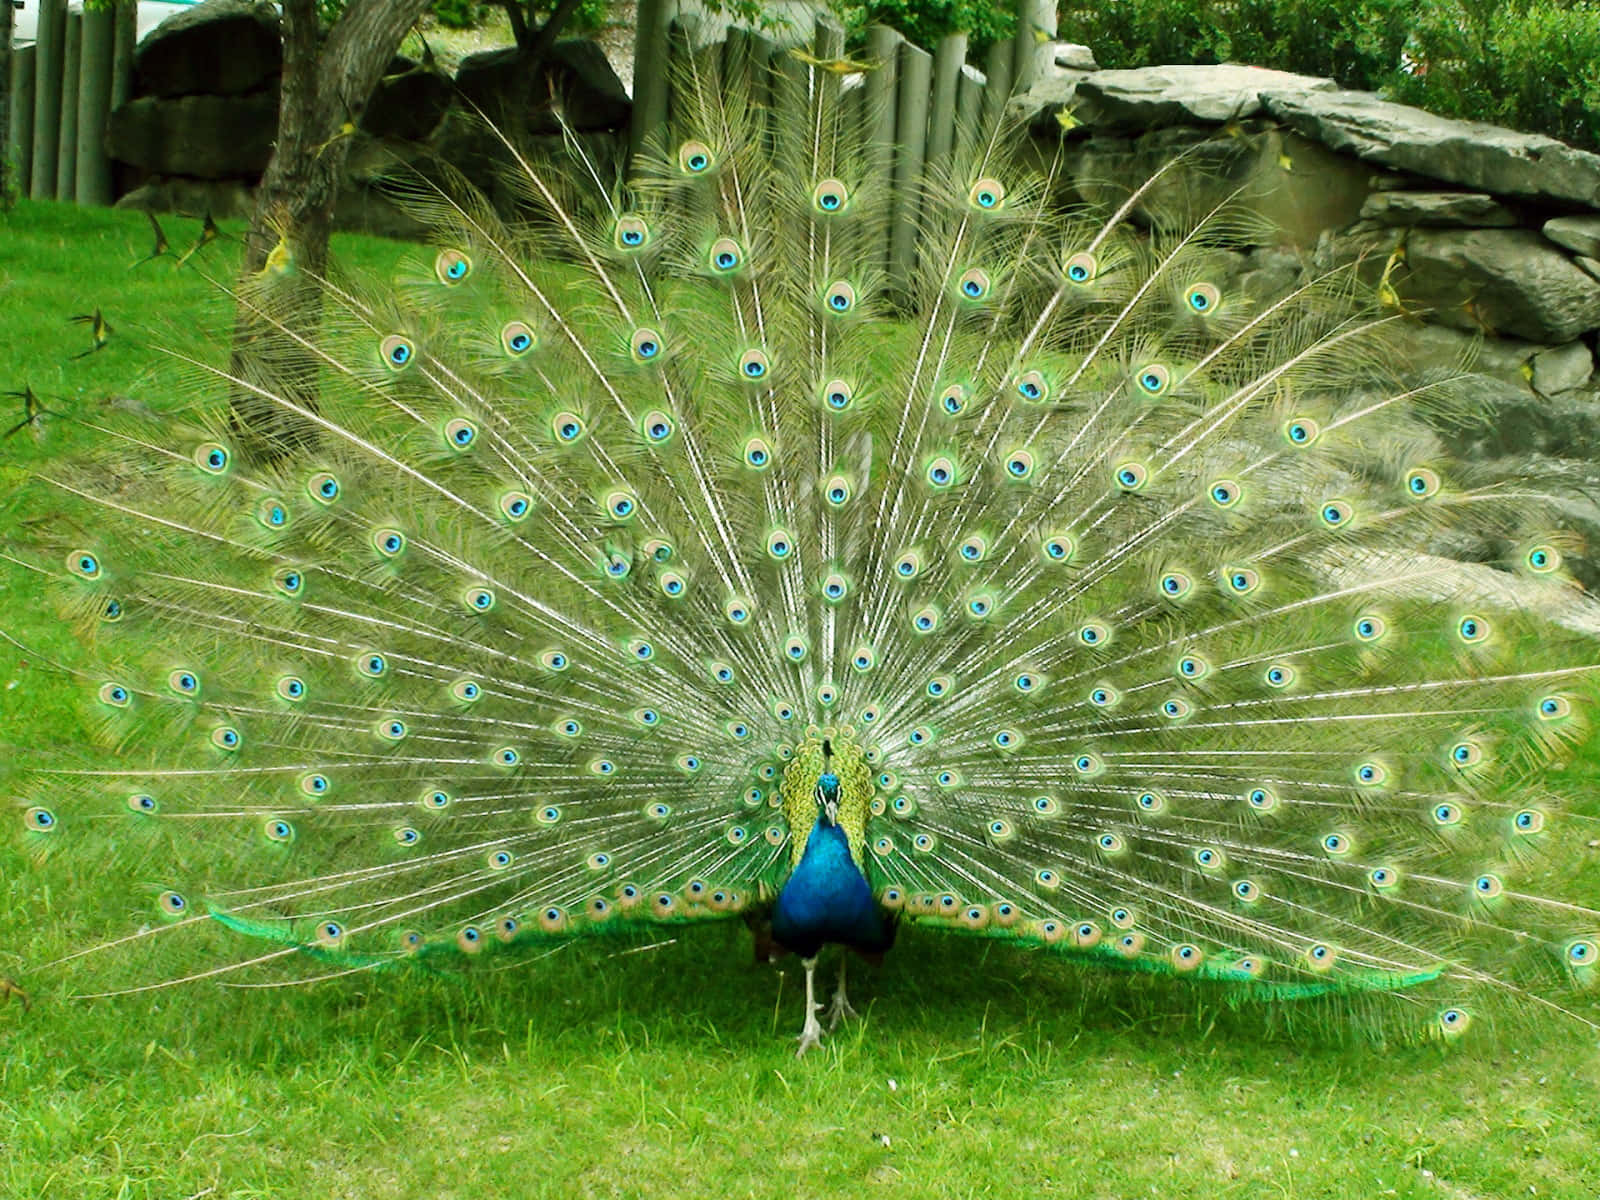 Majestic Peacock Bird Spreading Its Feathers